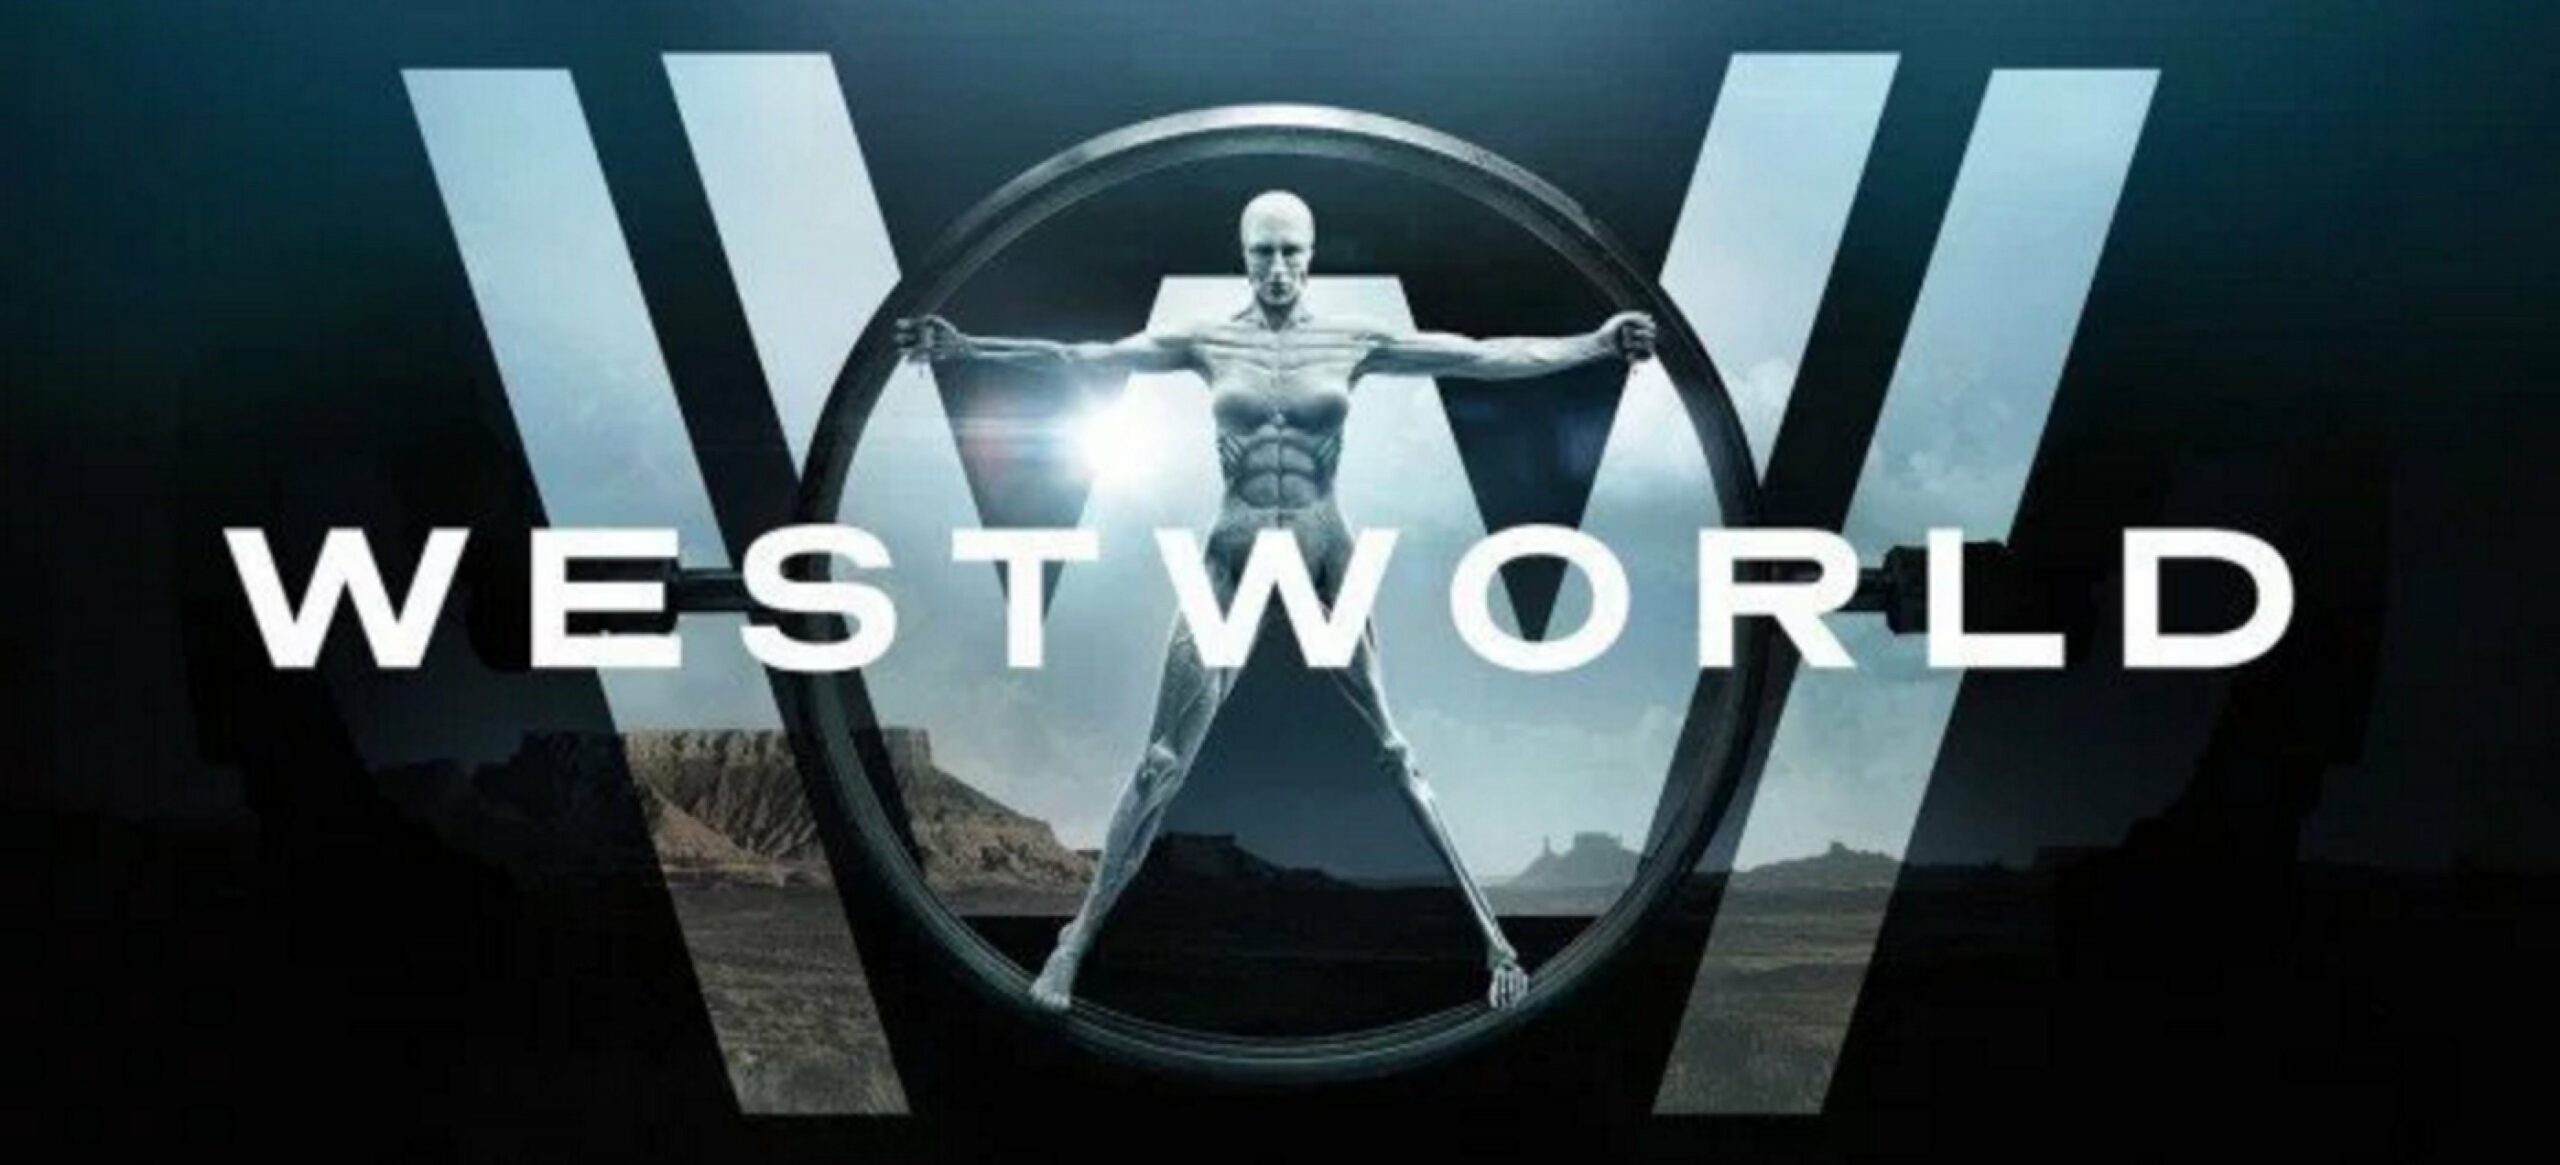 The New Trailer for Westworld Season 2 Shows Chaos in Control